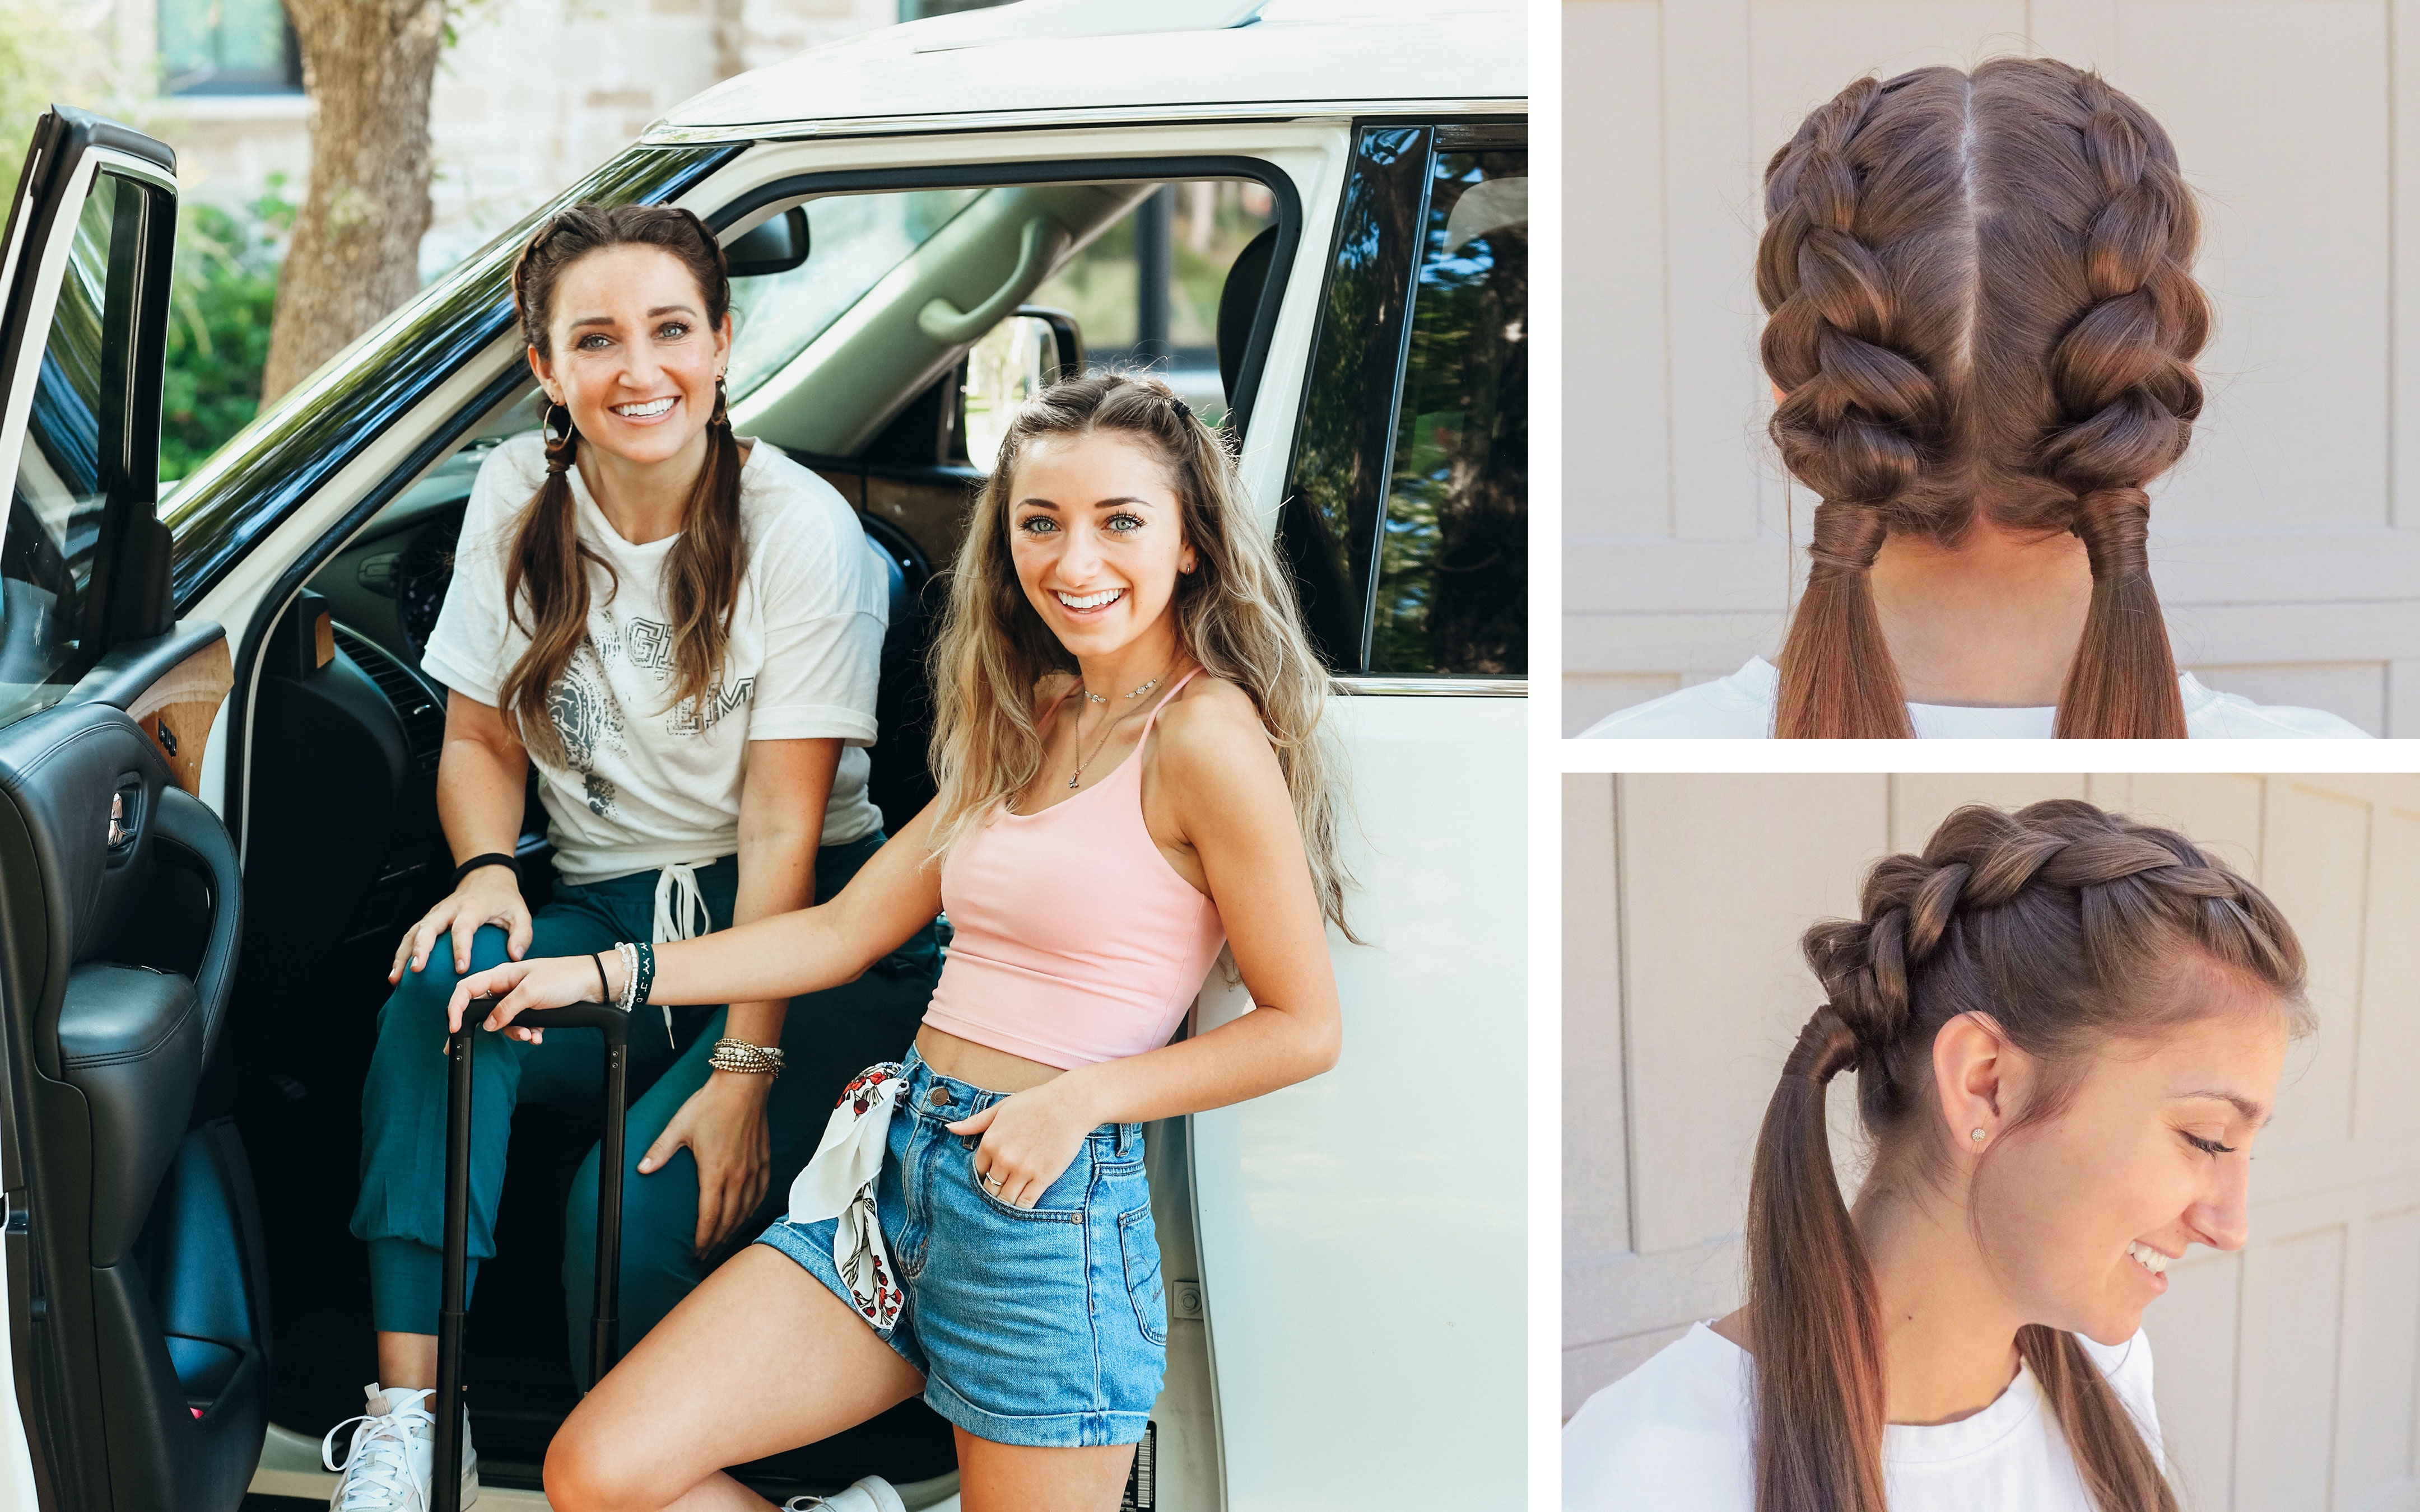 35 Dutch Braids To Try On Your Hair This Weekend